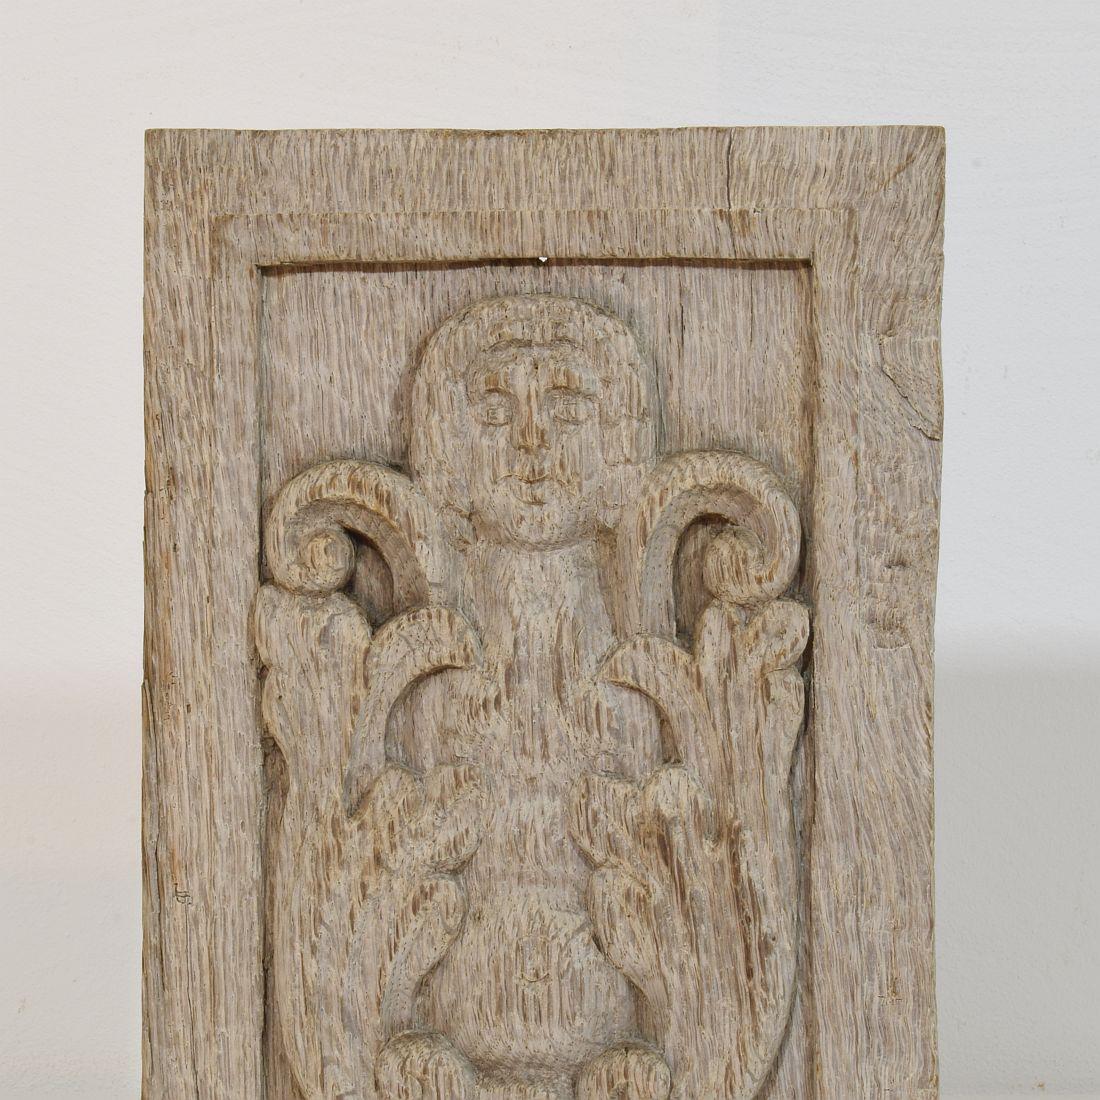 16th-17th Century French Carved Oak Panel with an Angel Figure For Sale 2